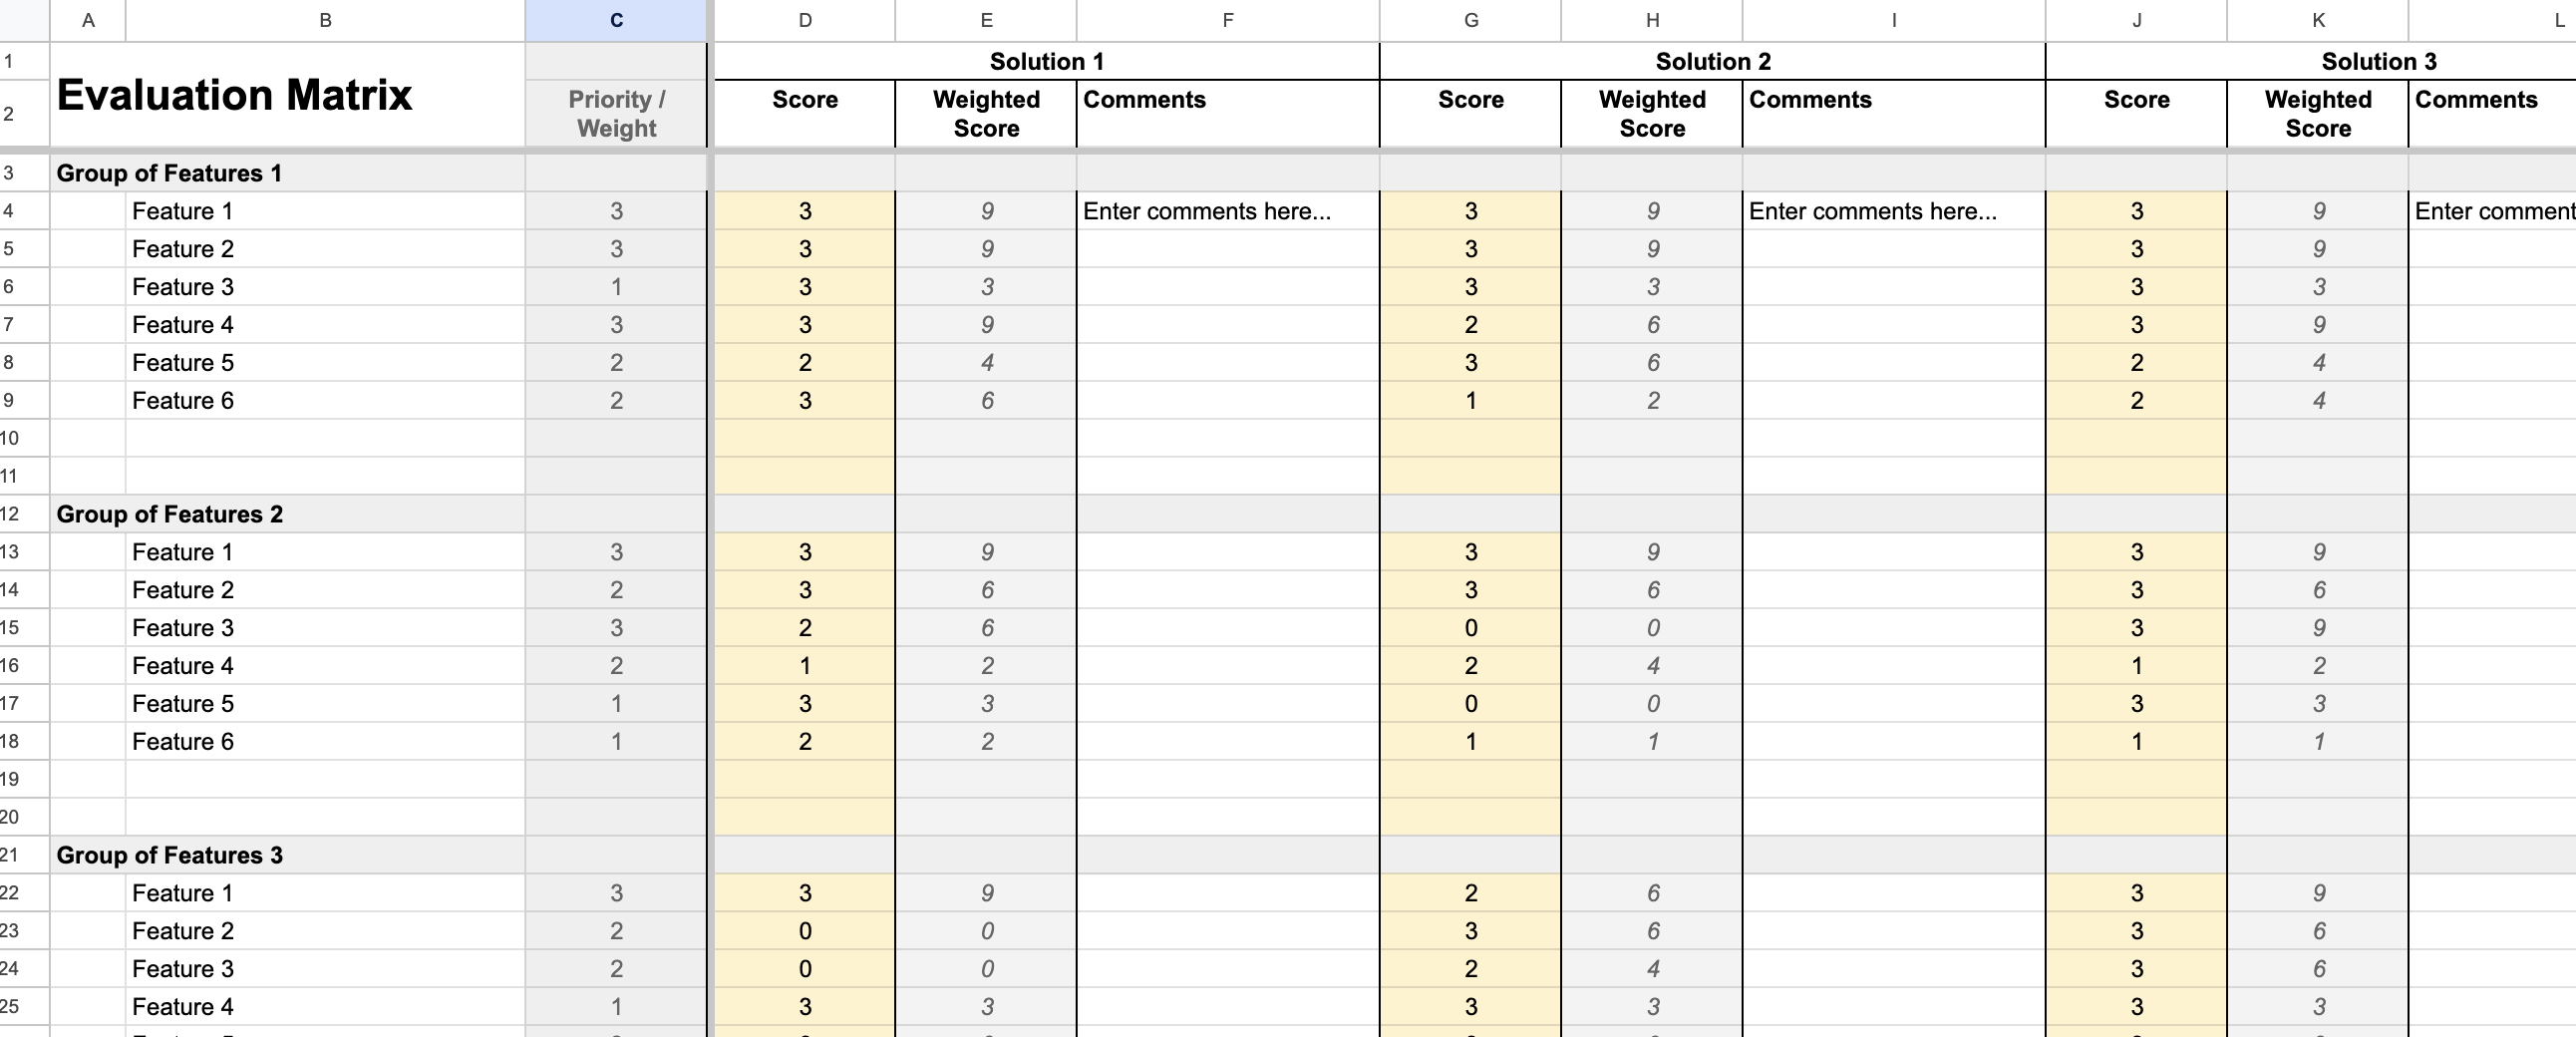 A simple spreadsheet can help you score and track your findings as you evaluate different solutions.